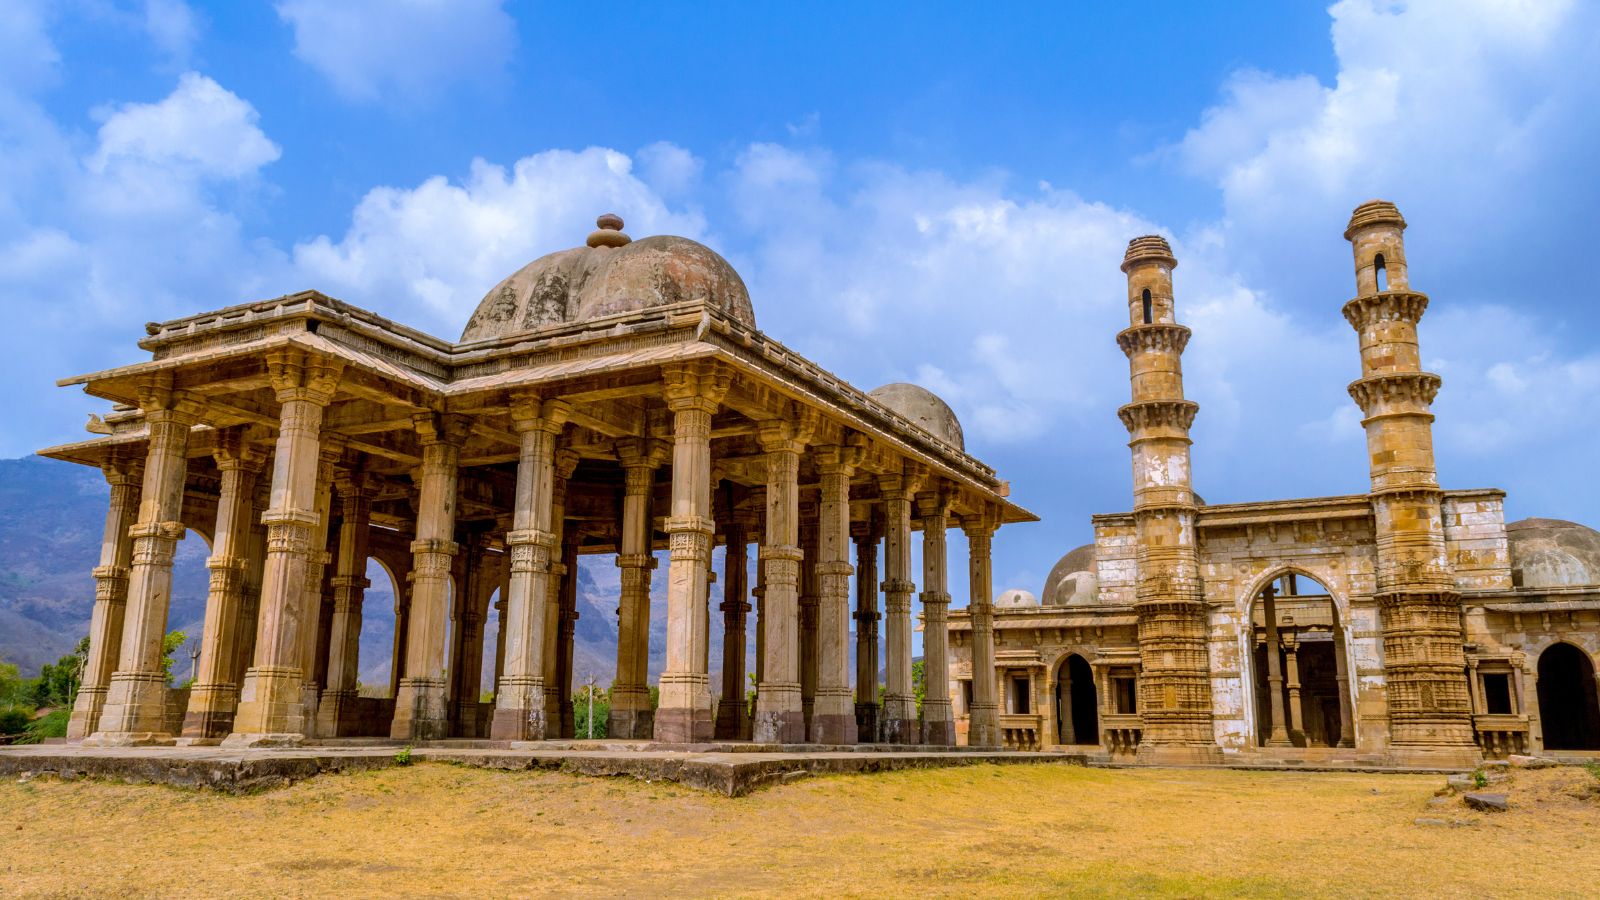 Kevada Masjid and the cenotaph in Pavagadh-Champaner Archaelogical Park